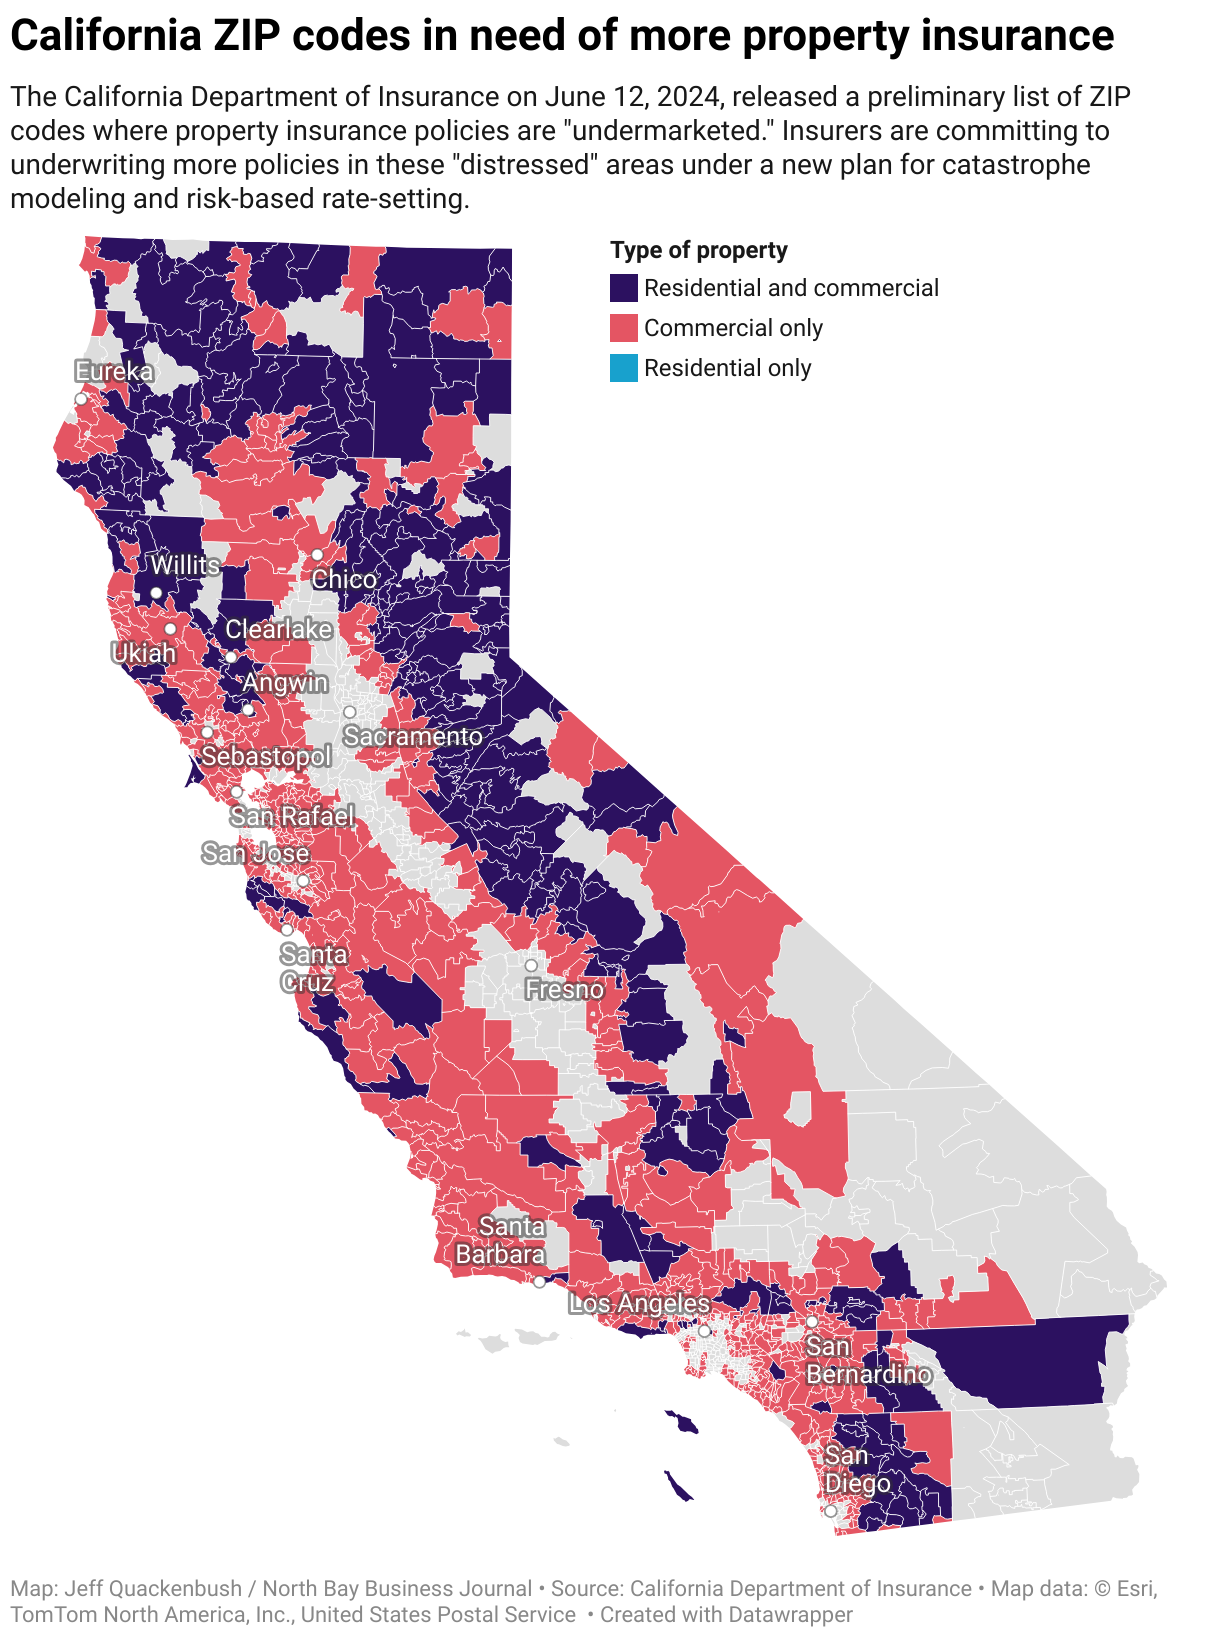 This ZIP code map of California shows which ones are "undermarketed" for residential and commercial property insurance policies, noted in red and purple, respectively.